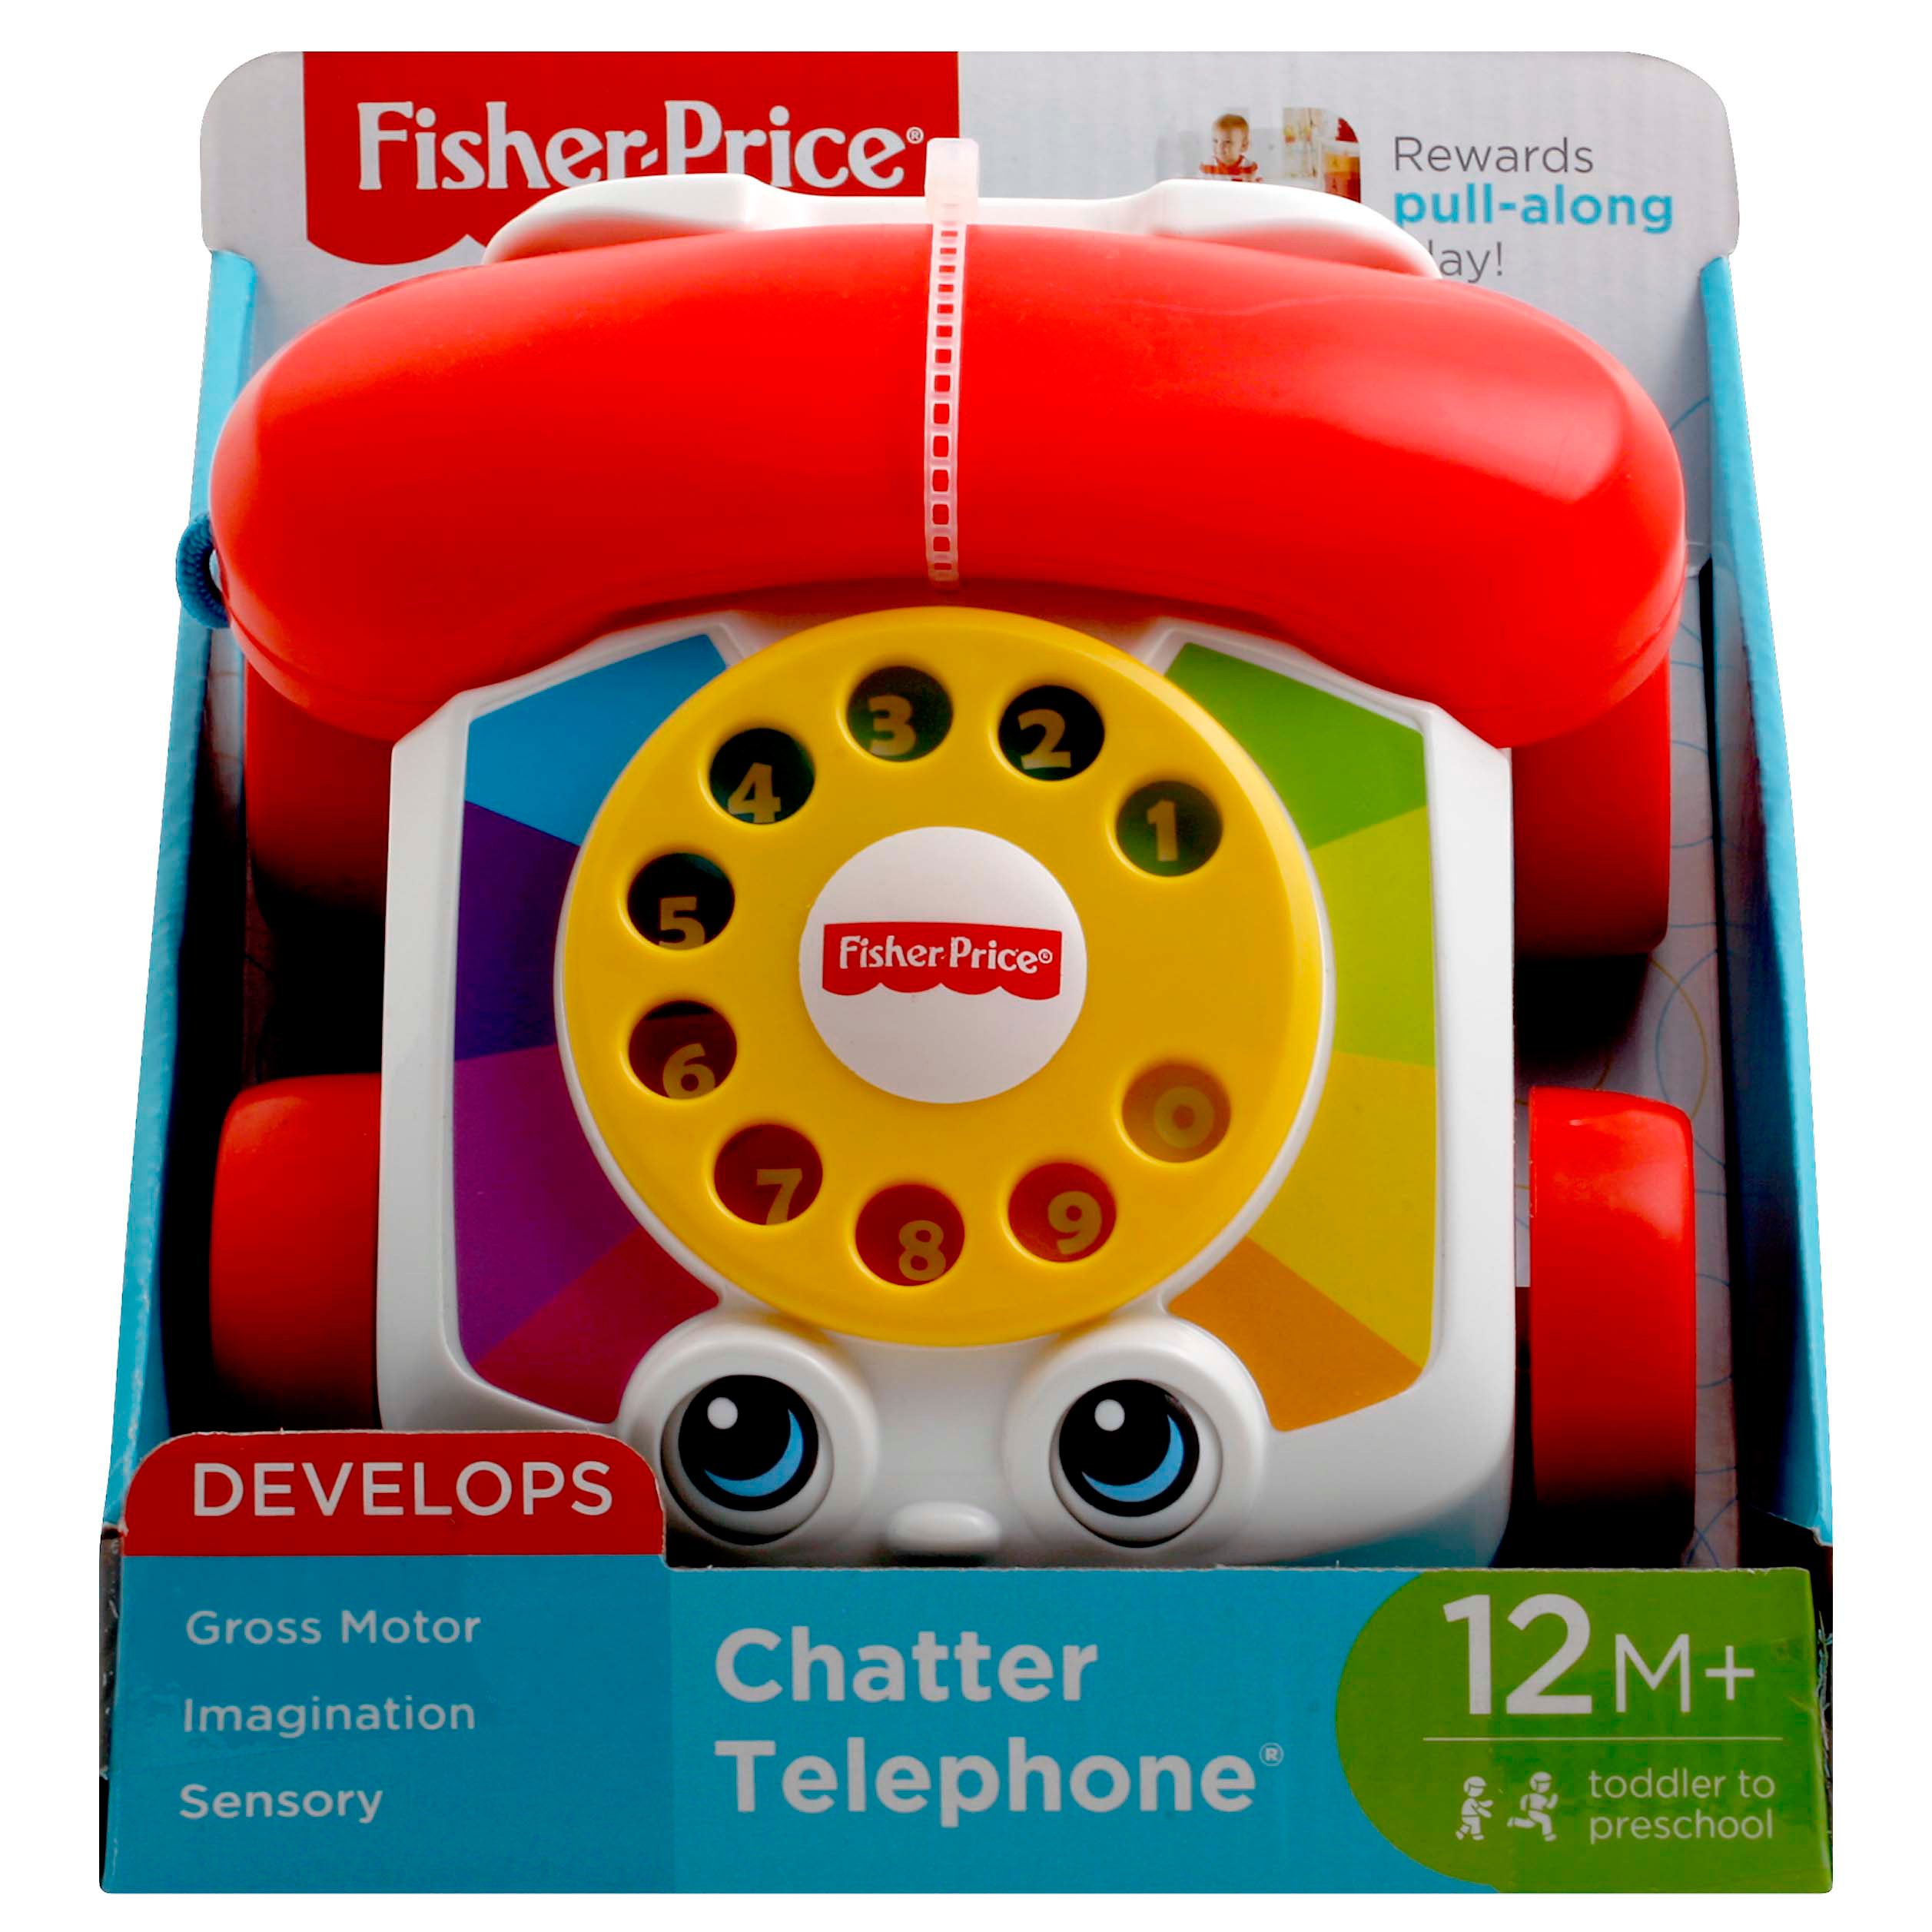 fisher price store near me